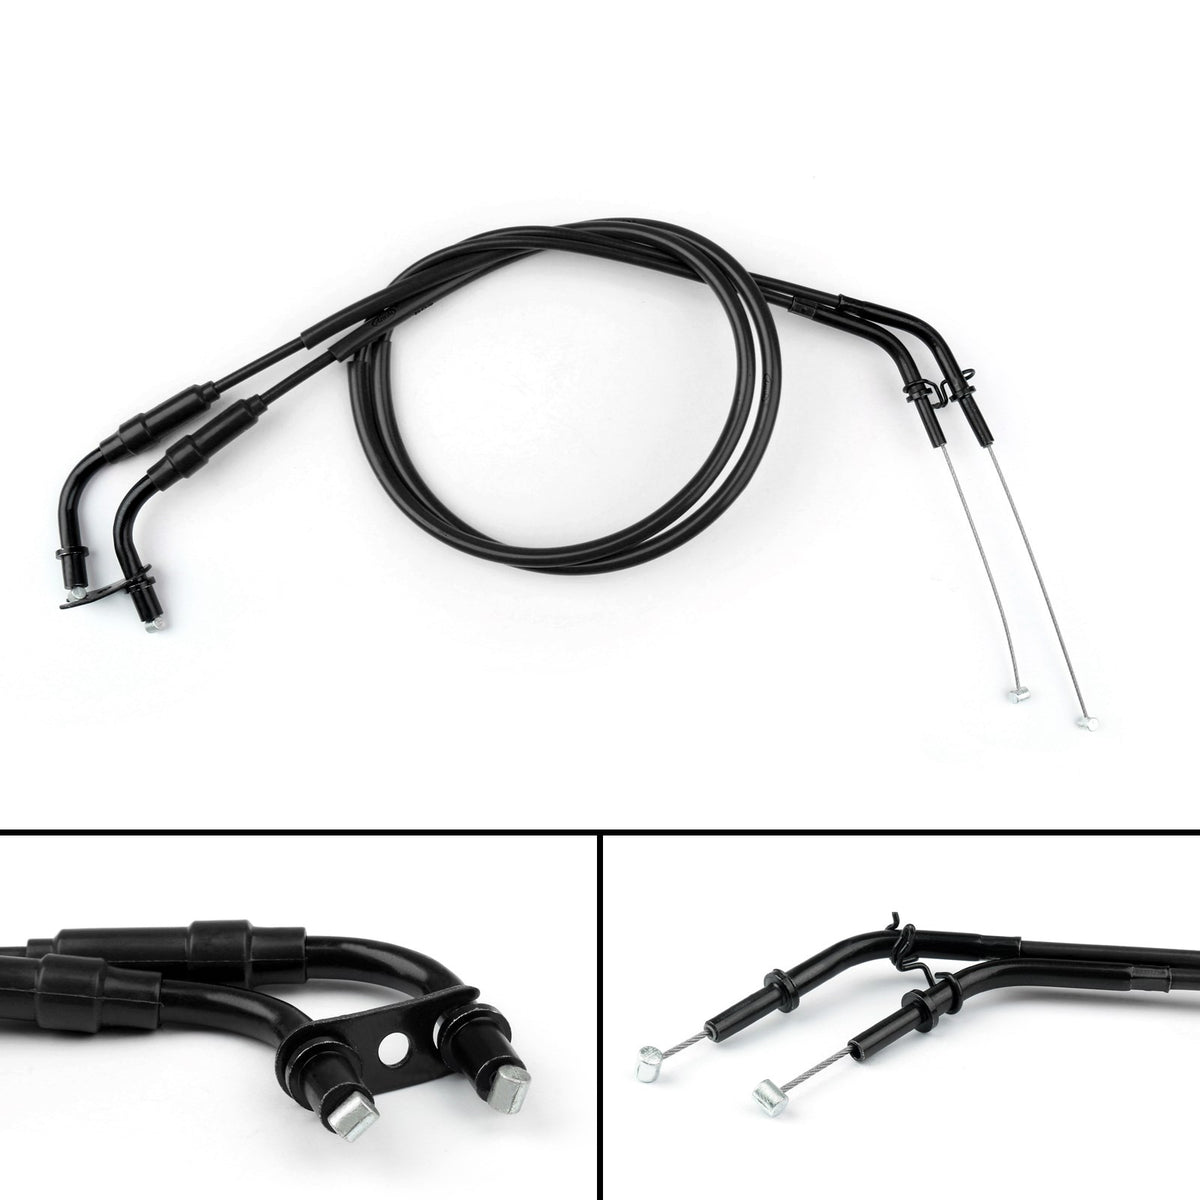 Throttle Cable Push/Pull Wire Line Gas For Kawasaki Z1000 Z 1000 2014-2016 Black